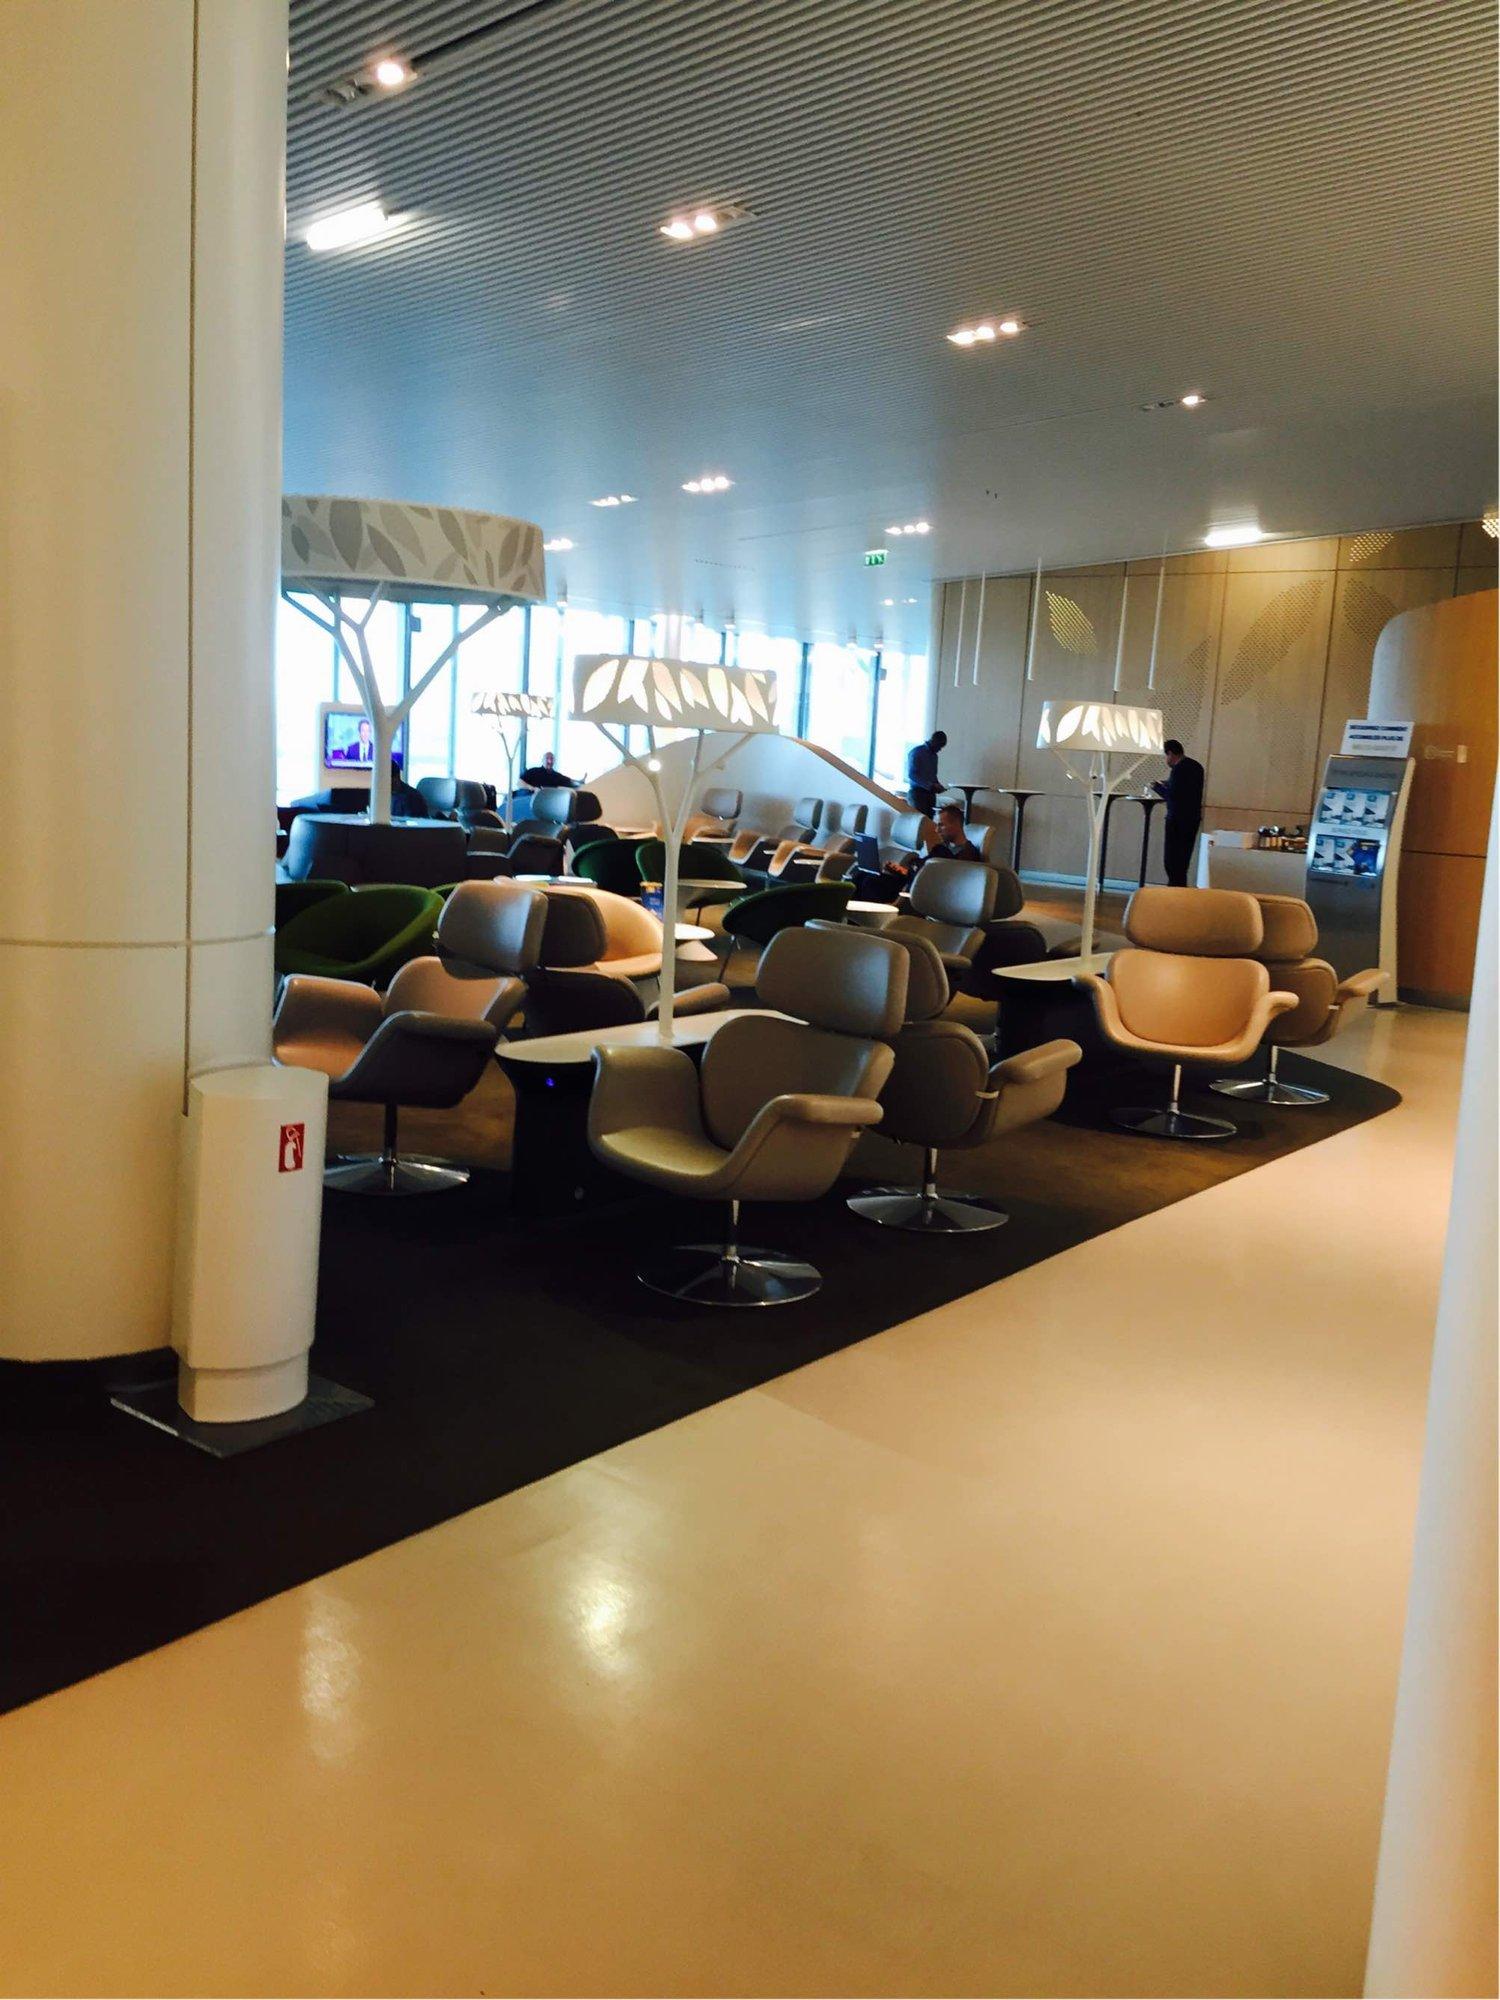 Air France Lounge (Concourse M) image 13 of 17